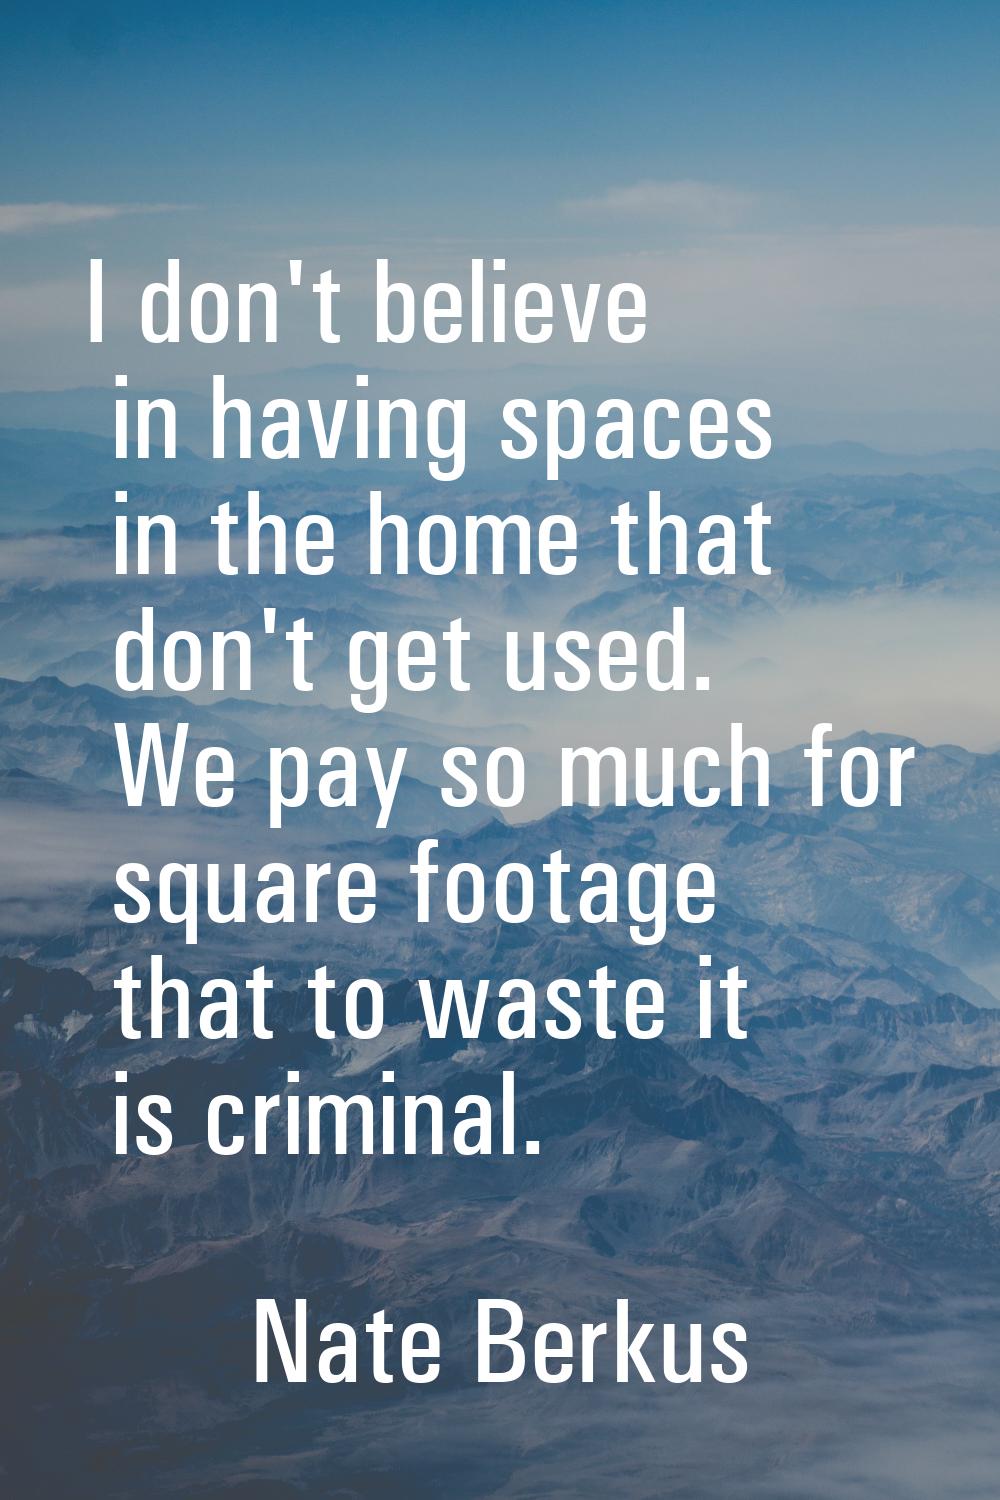 I don't believe in having spaces in the home that don't get used. We pay so much for square footage